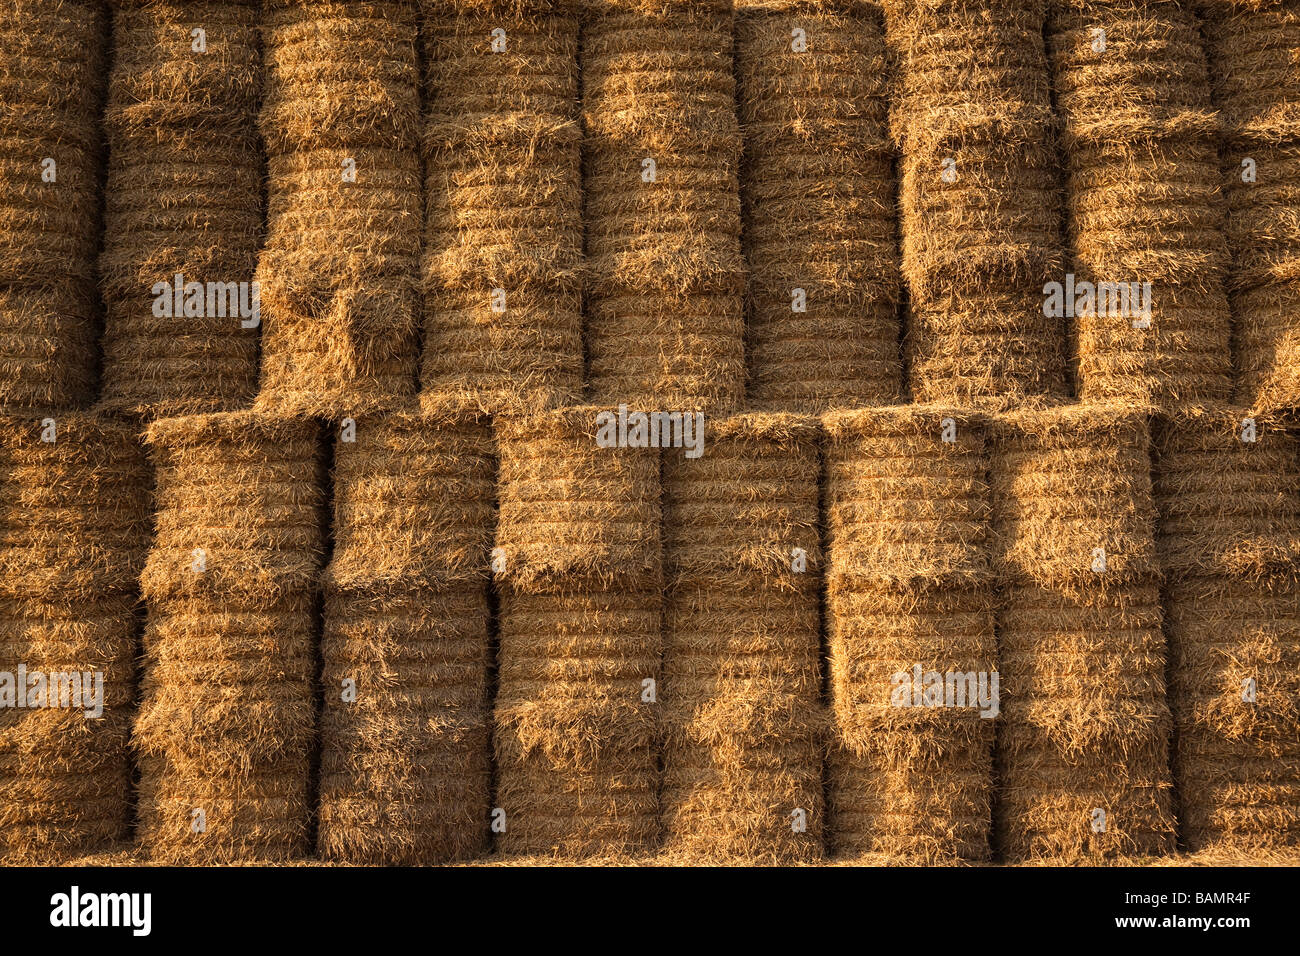 stack of straw bales stacked high Stock Photo